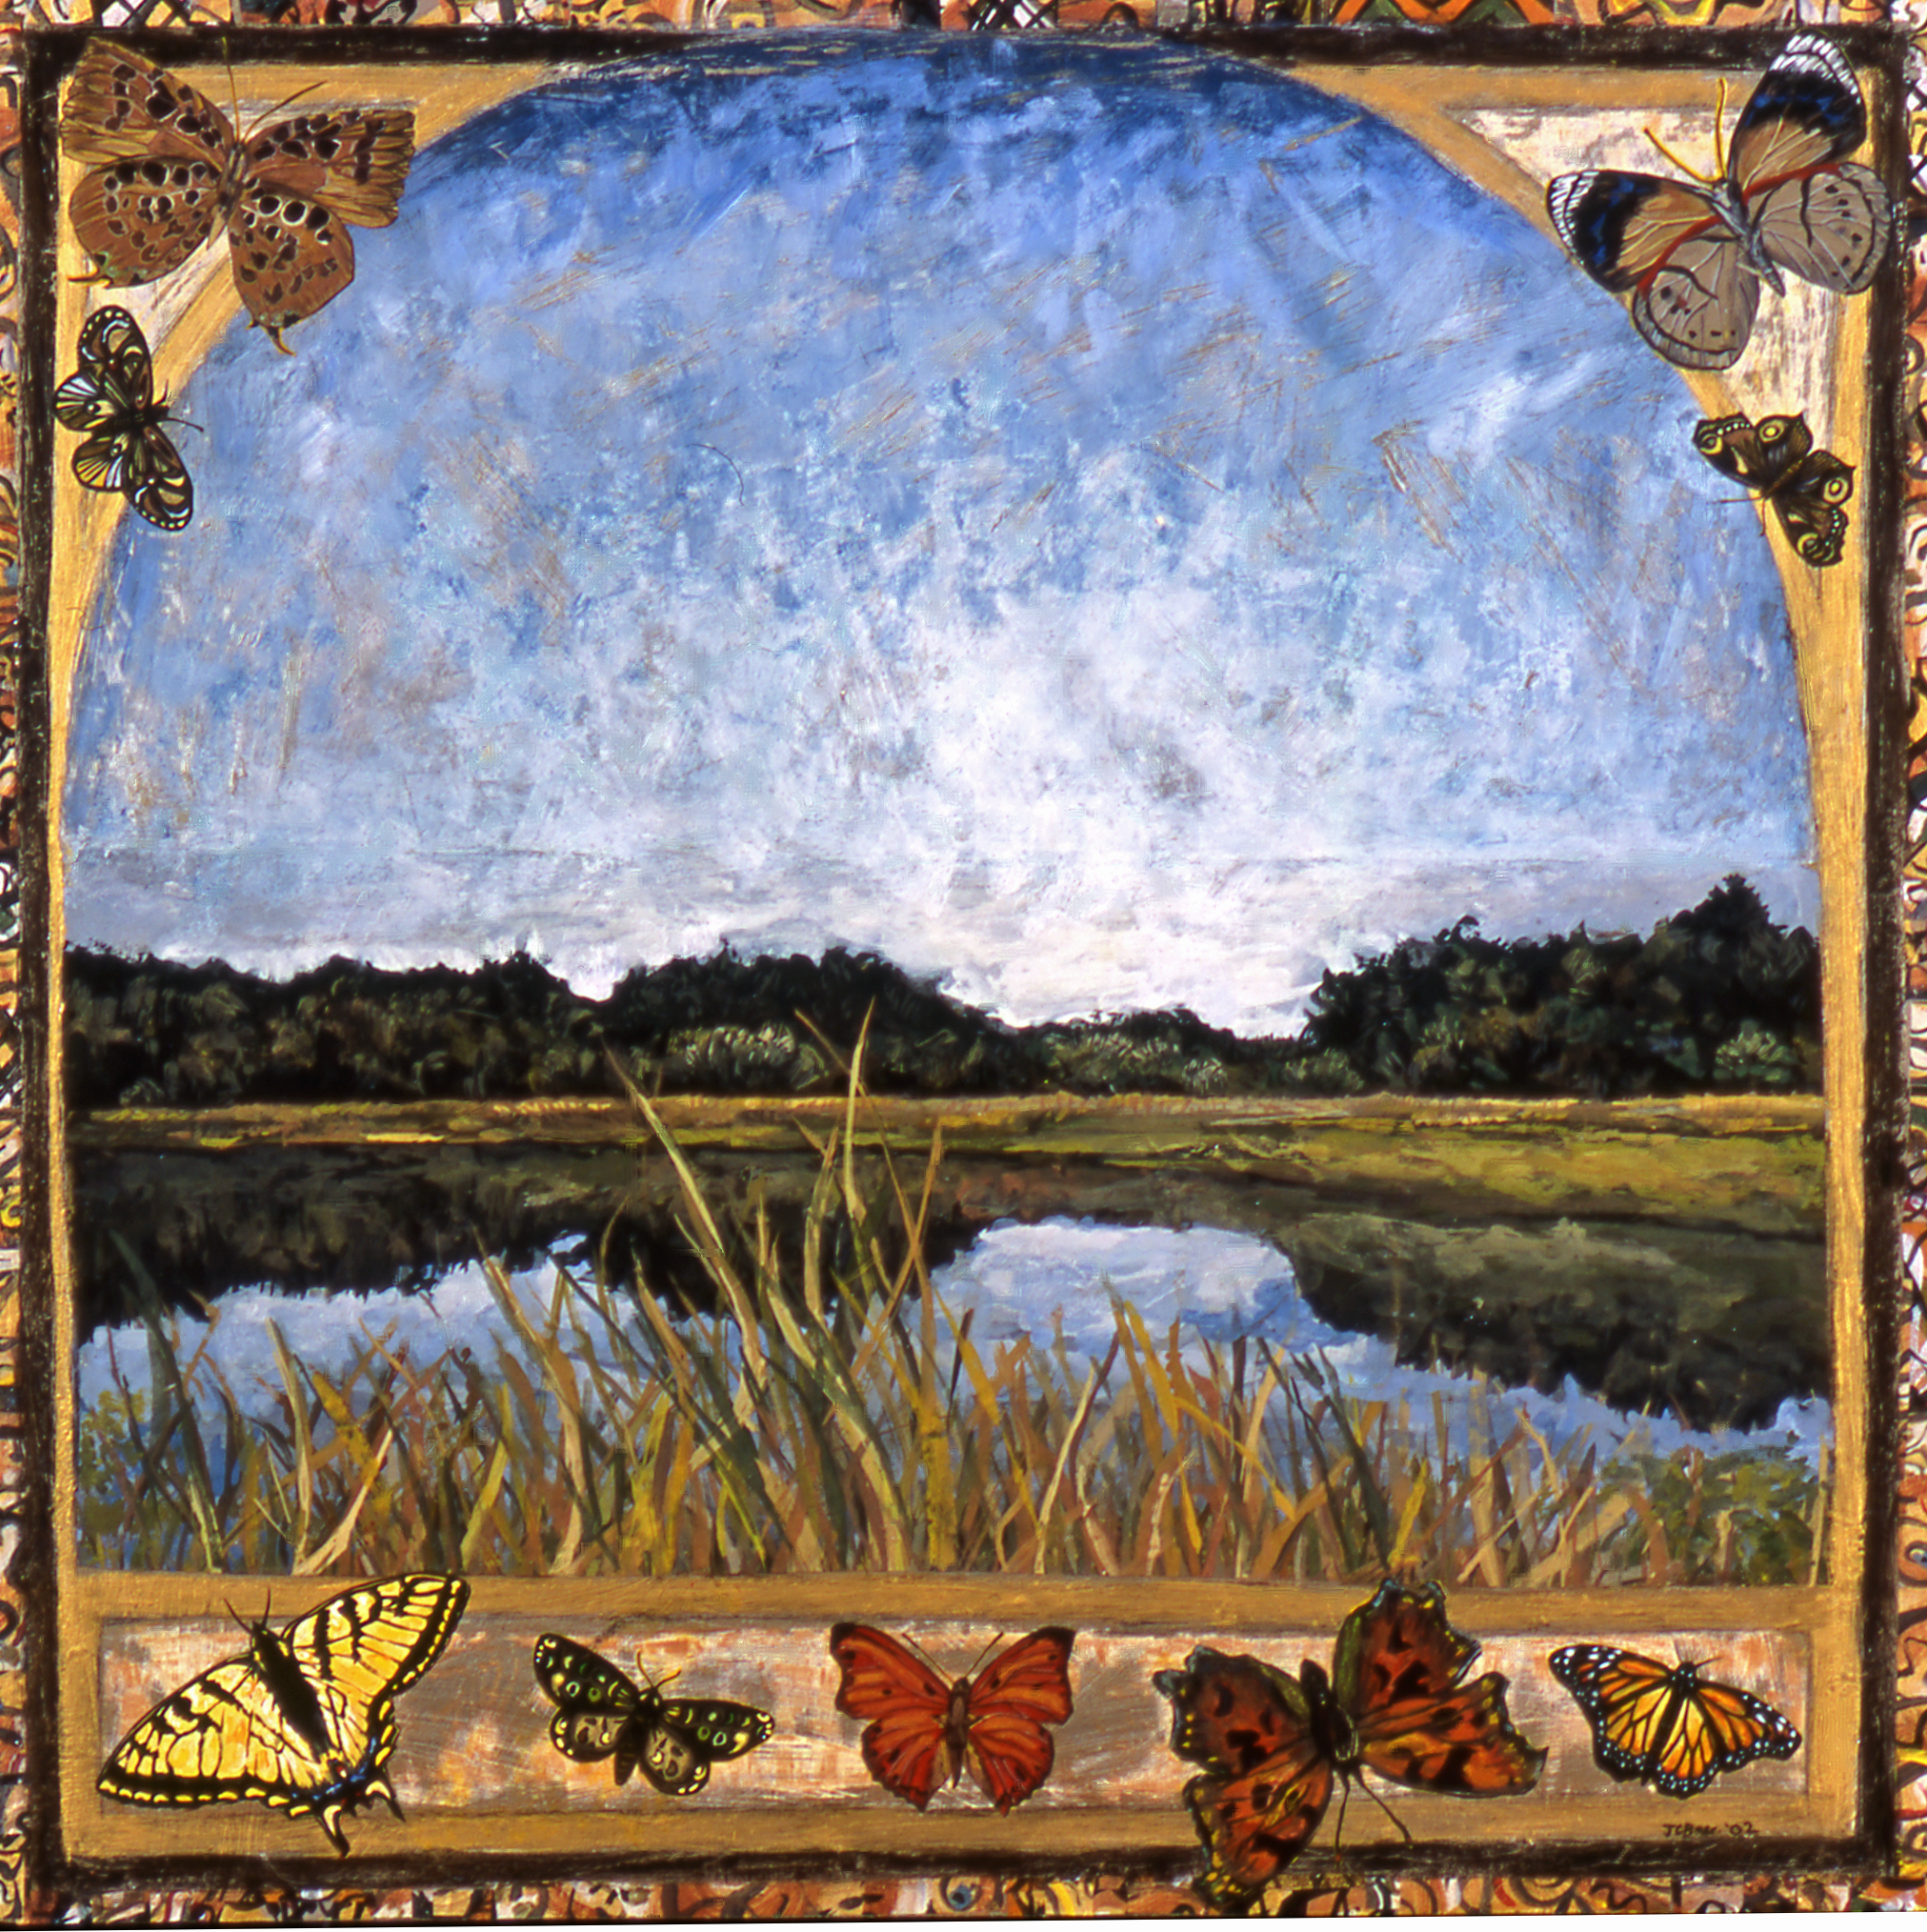 Great Meadows and Butterflies, 2002, 23 ½ x 23 ½, gouache and acrylic on wood panel, $2000